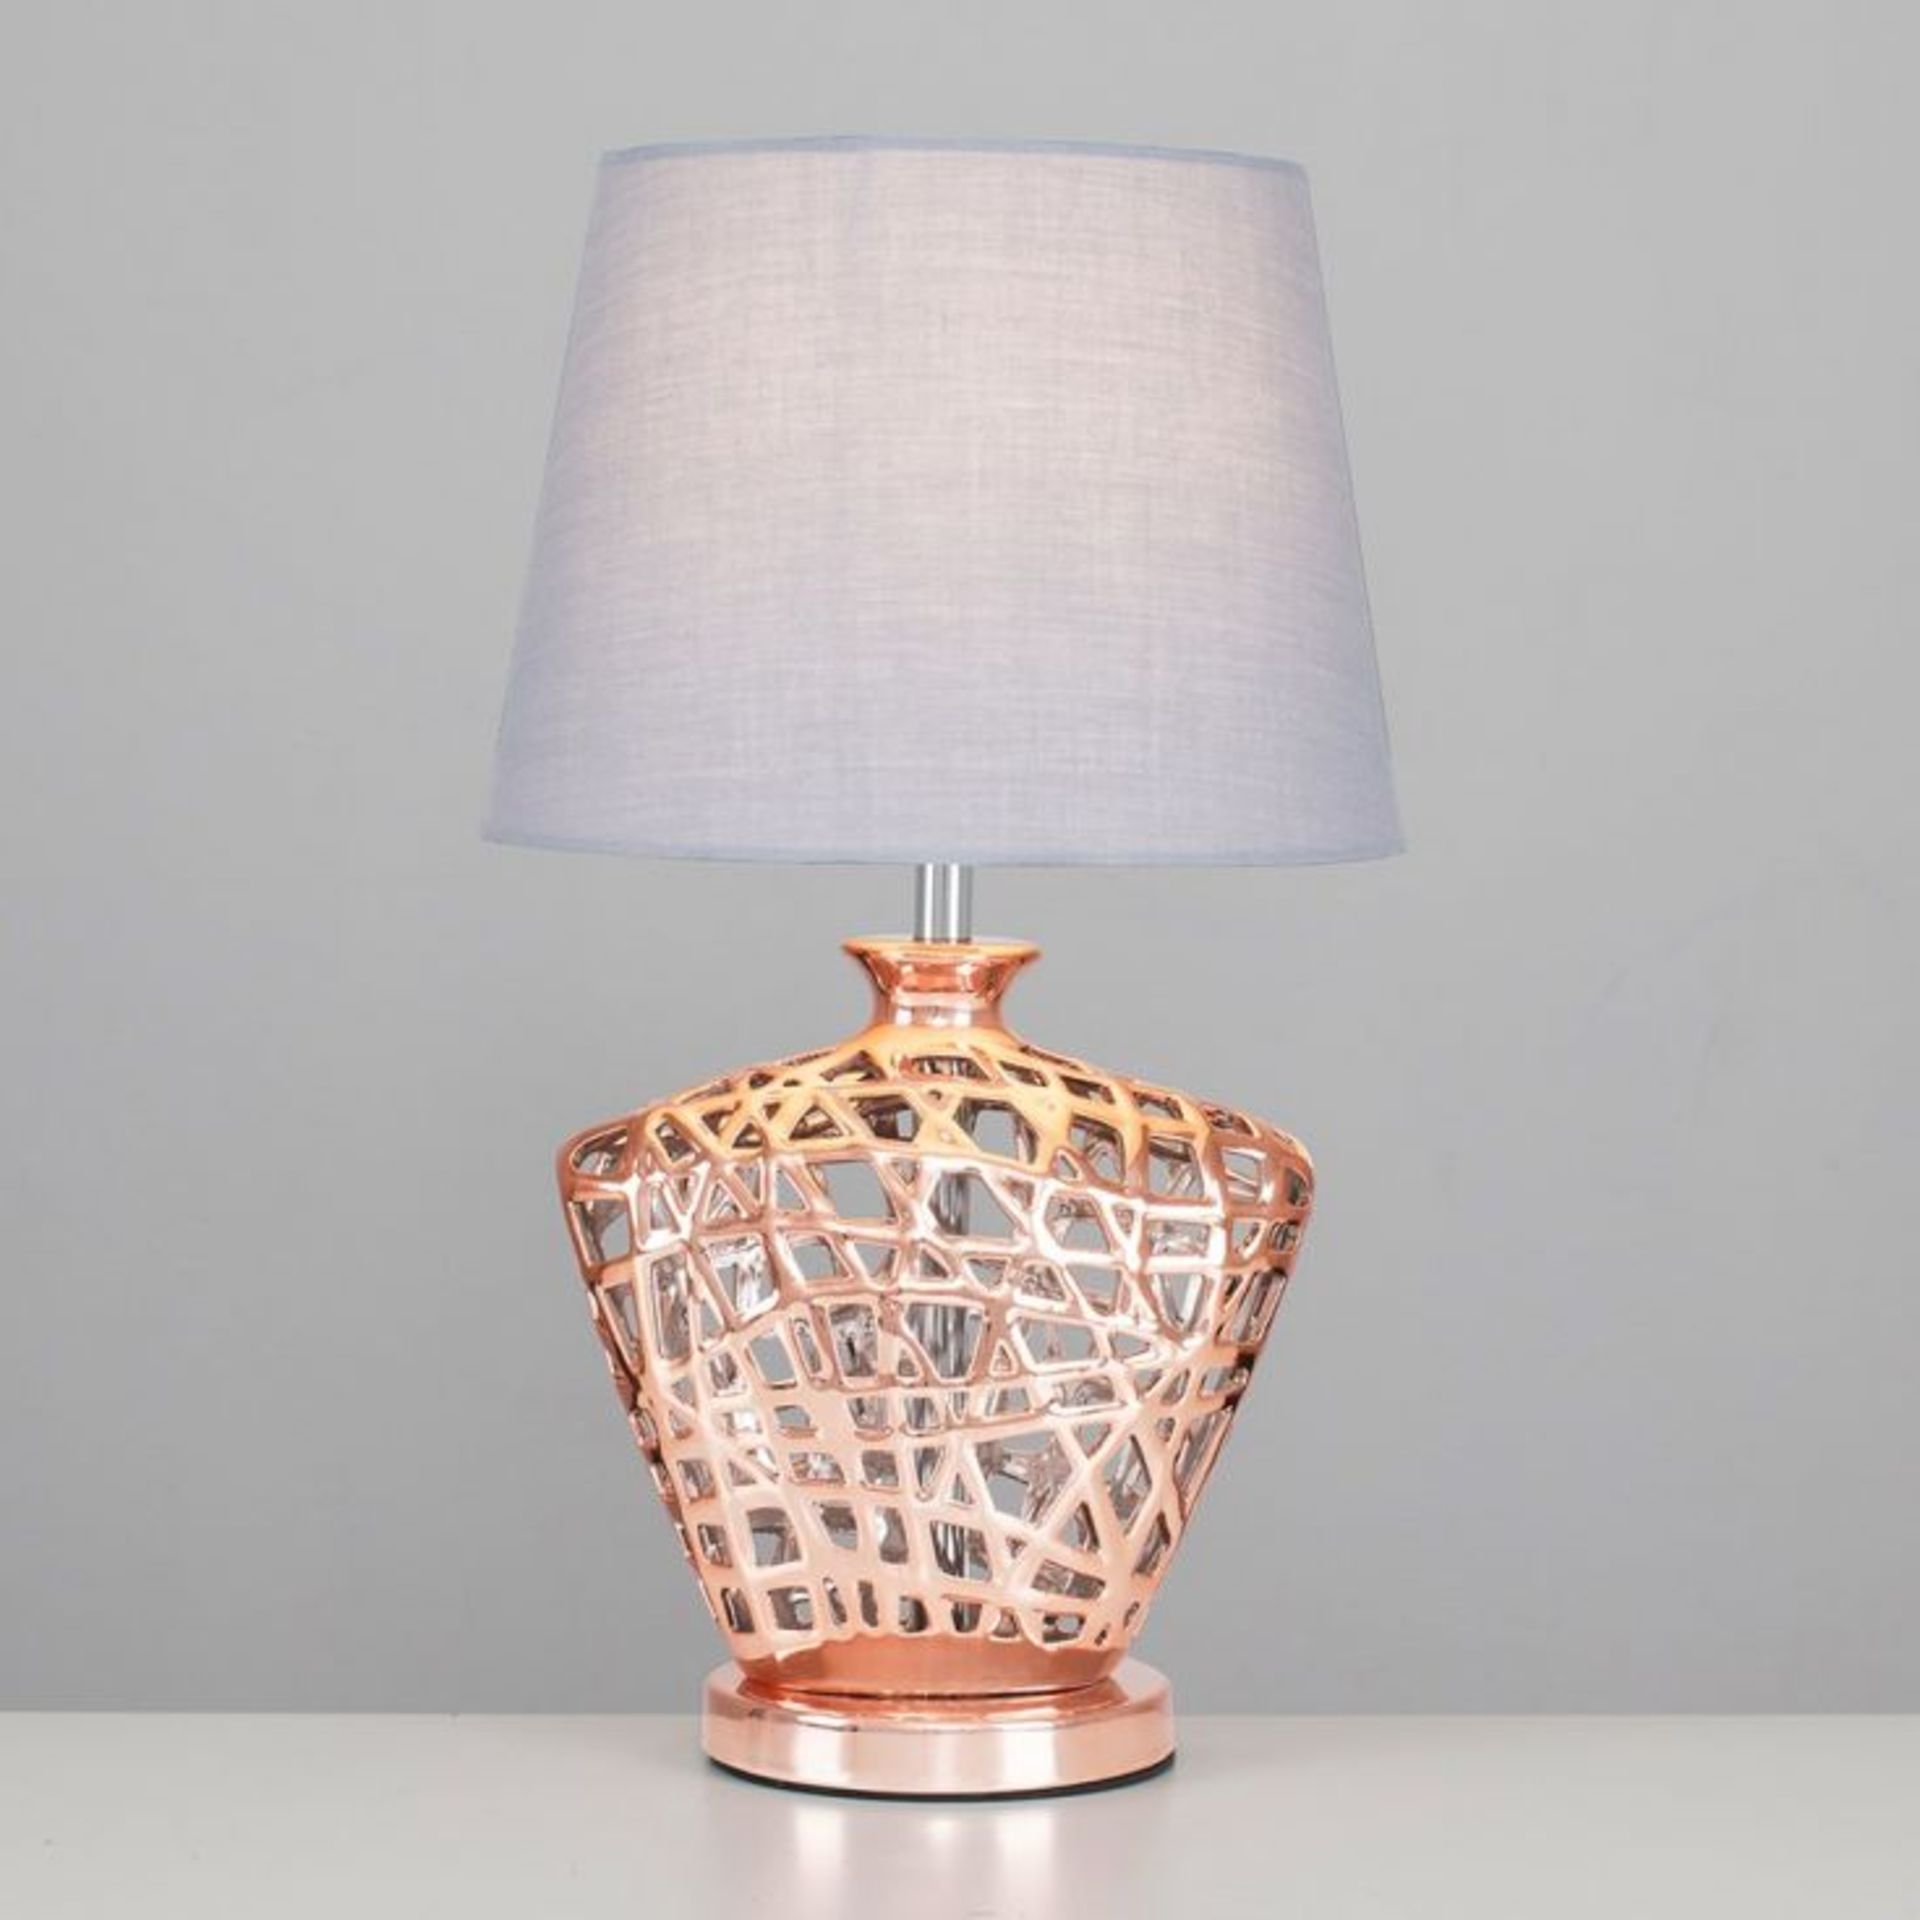 Kalvin Lattice Ceramic Base Copper Table Lamp with small pendant drum shade This superb table lamp